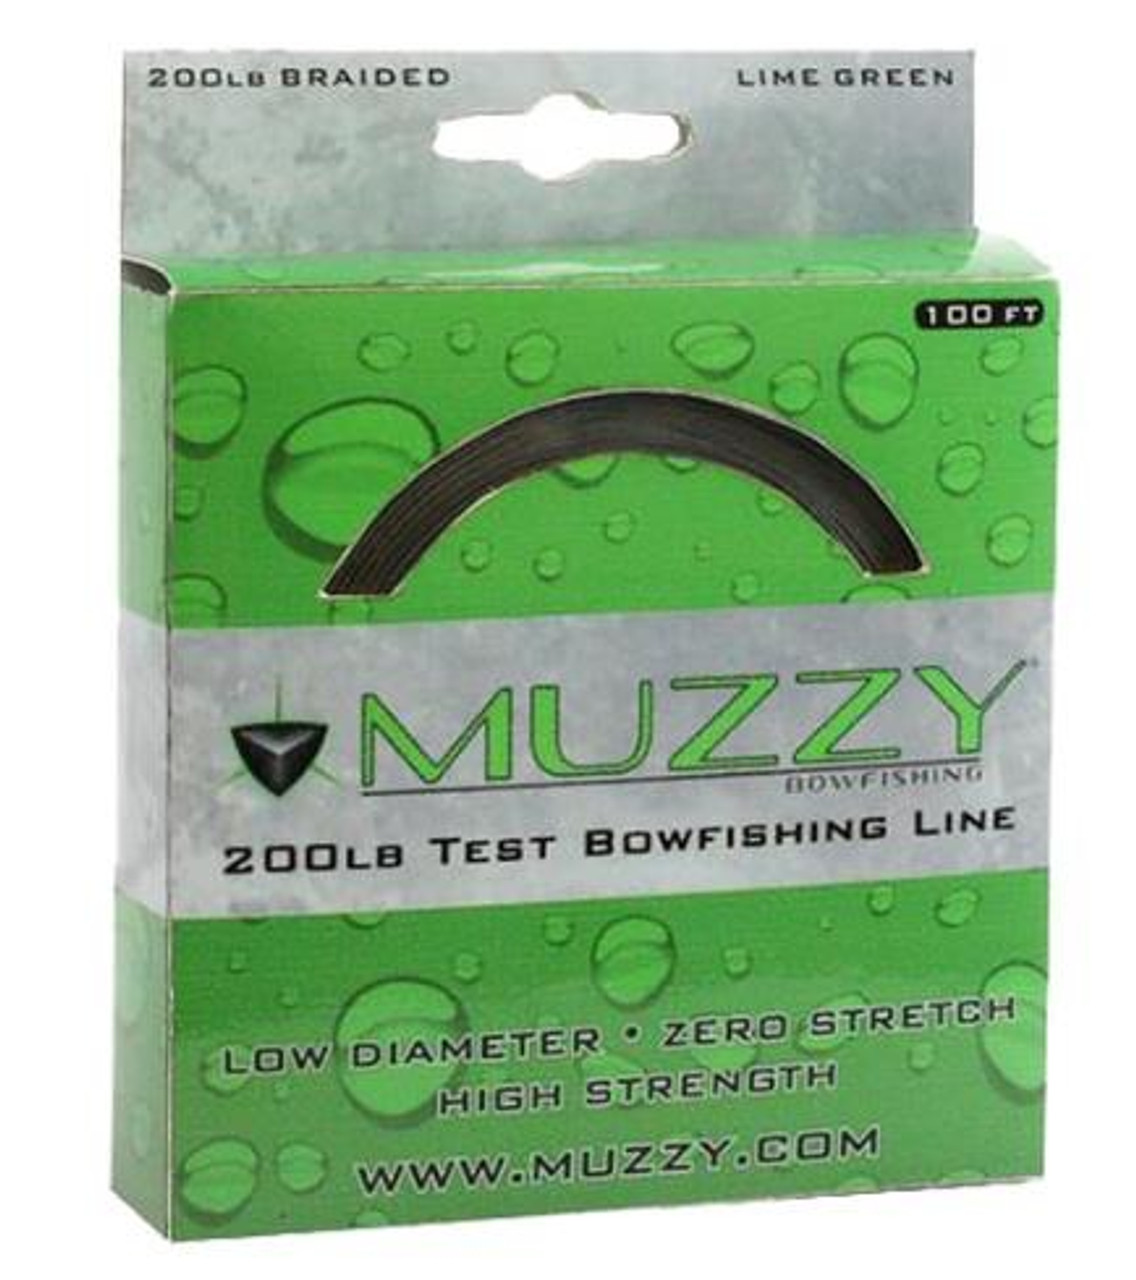 https://cdn11.bigcommerce.com/s-d4f5hm3/images/stencil/1280x1280/products/22321/140035/Muzzy-Bowfishing-Lime-Green-Braided-200lb-Line-050301107809_image1__47820.1677208948.jpg?c=2